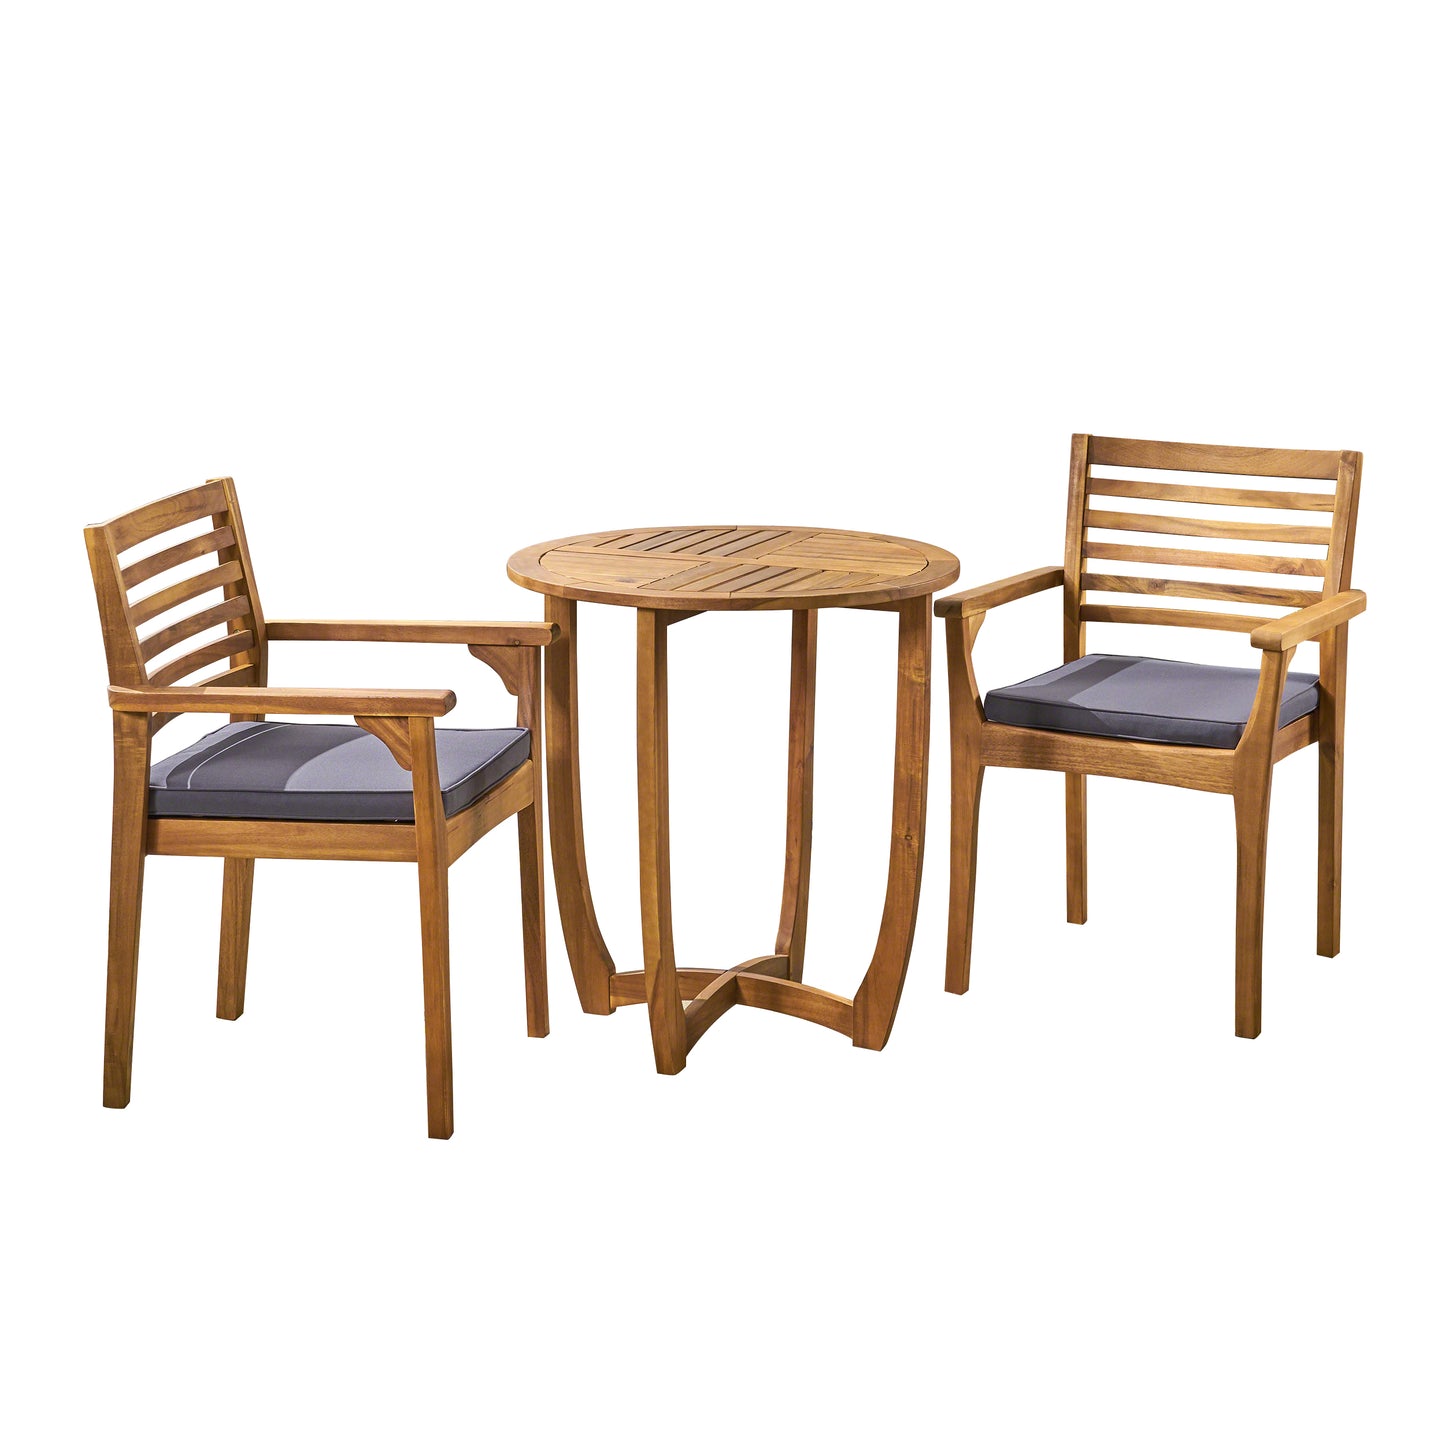 Phoenix Outdoor Acacia 2-Seater Bistro Set with Cushions and 28" Round Table with Closed Legs